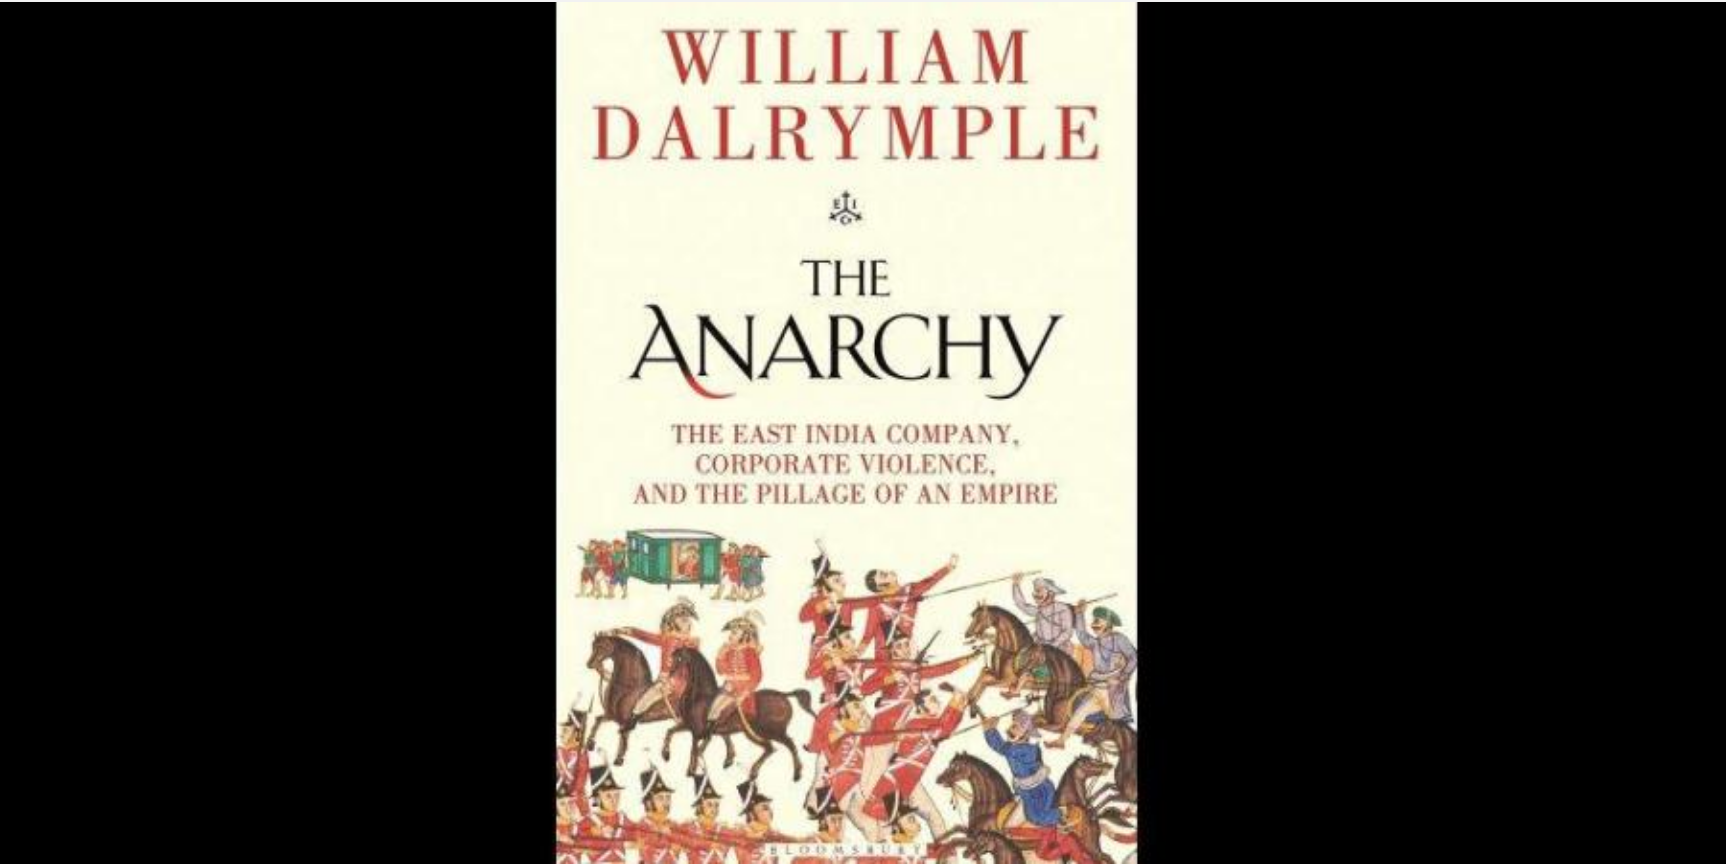 William Dalrymple's bestseller 'The Anarchy' to be adapted into TV series